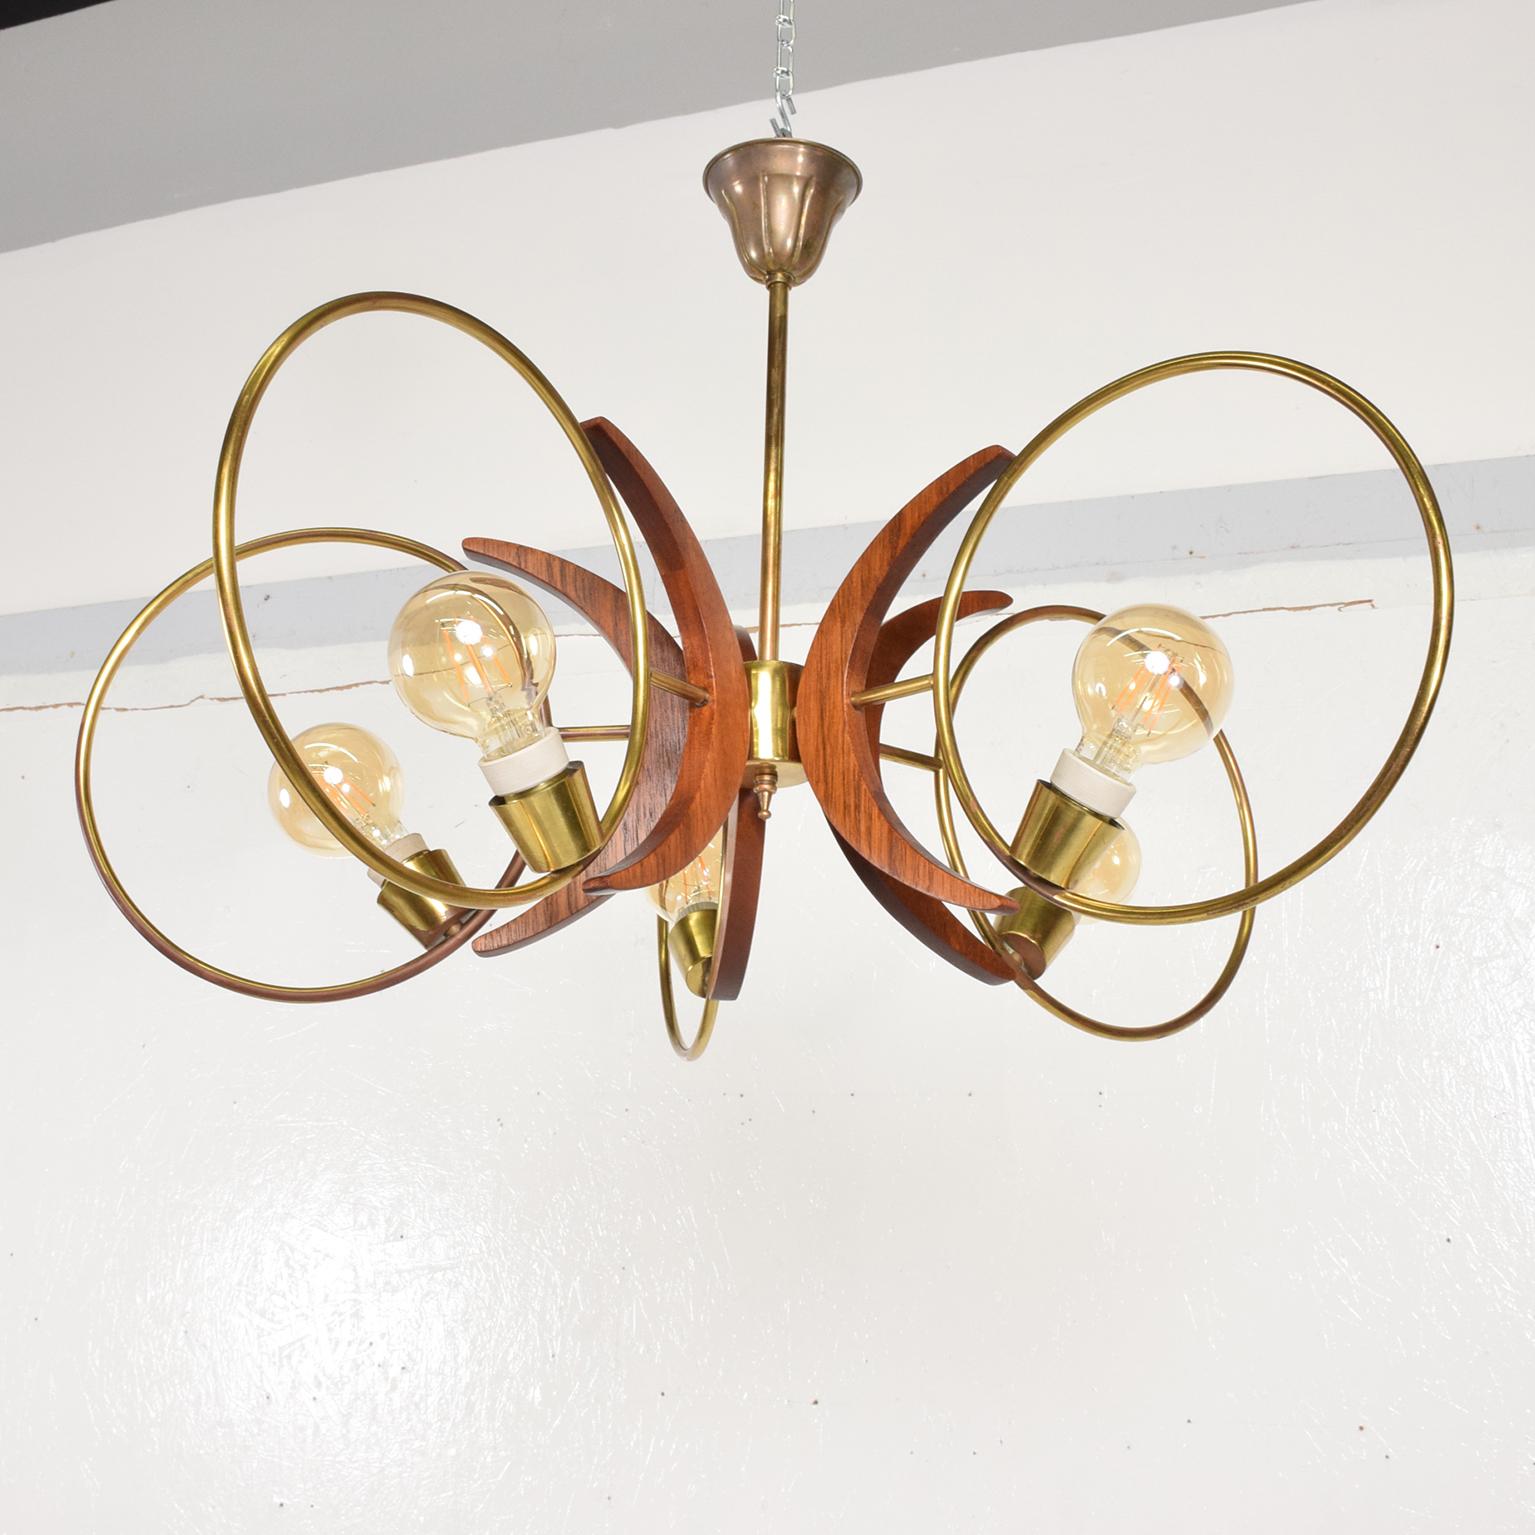 Modern Five Ring Swirling Sculptural Chandelier from Mexico City 1960s
Unmarked. Crisp Clean design.
Features five rings in patinated brass with sculptural mahogany wood ornamentation.
Dimensions 33 in diameter x 22 tall inches.
Vintage patina on